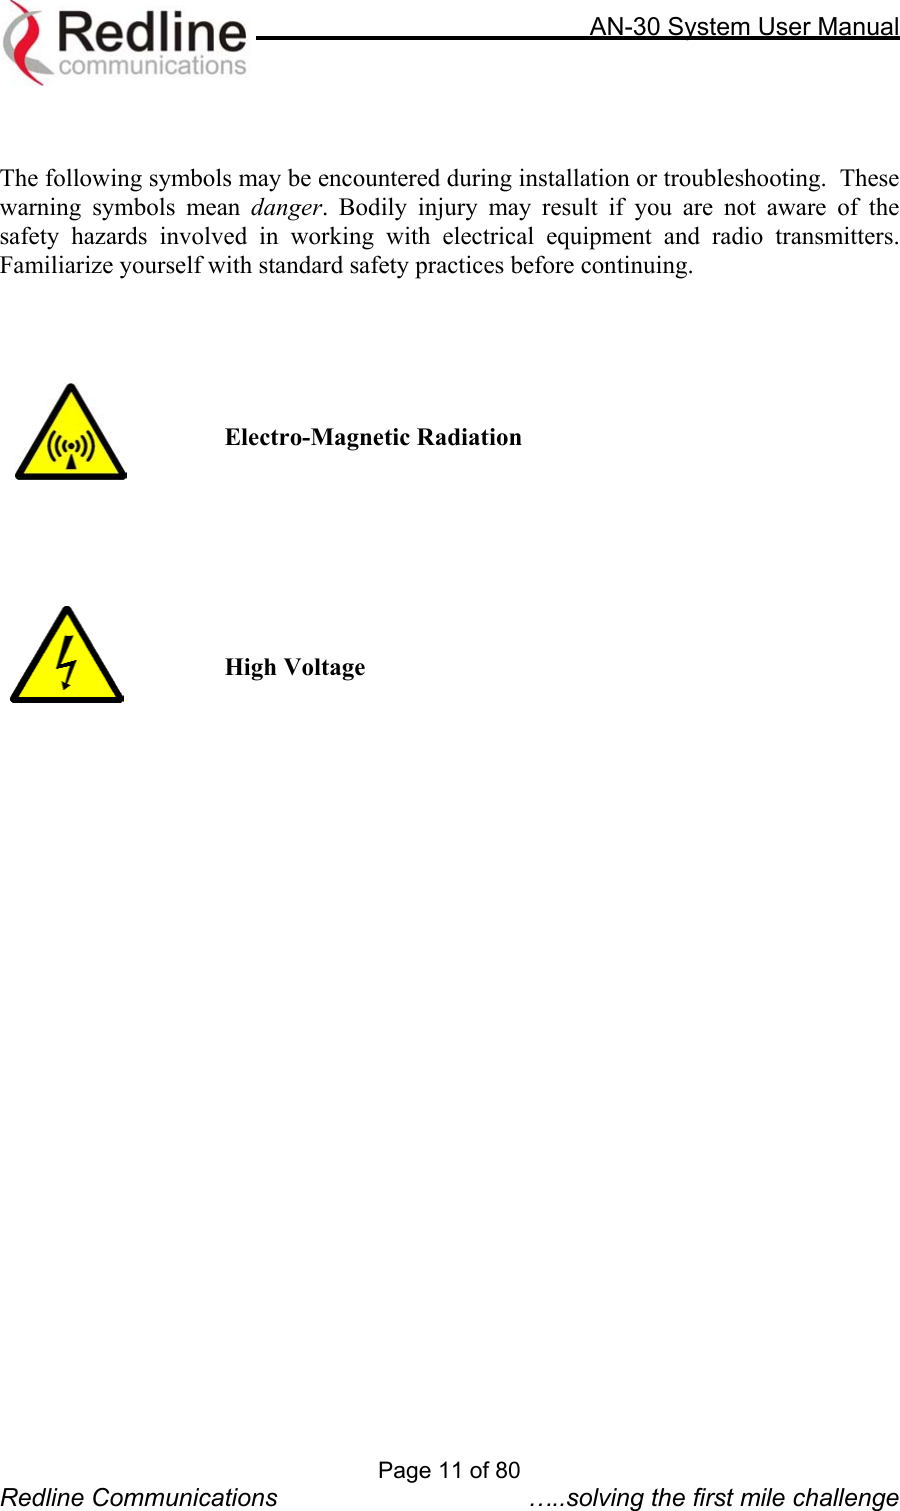     AN-30 System User Manual    The following symbols may be encountered during installation or troubleshooting.  These warning symbols mean danger. Bodily injury may result if you are not aware of the safety hazards involved in working with electrical equipment and radio transmitters.  Familiarize yourself with standard safety practices before continuing.          Electro-Magnetic Radiation            High Voltage          Page 11 of 80 Redline Communications  …..solving the first mile challenge 